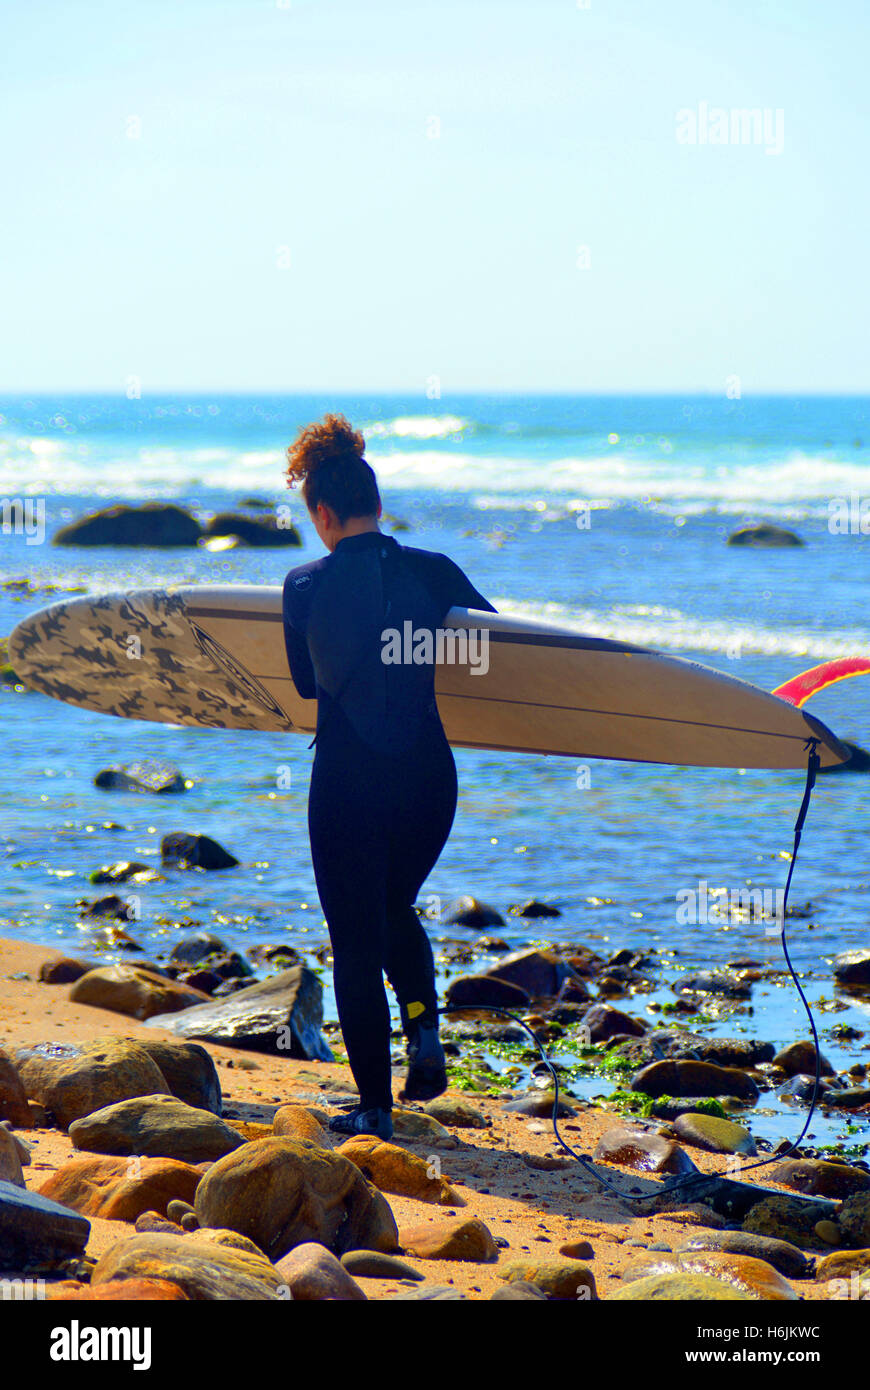 MONTAUK, NY-JUNE 13: Unidentified female surfer enters the ocean surf at Ditch Plains beach in Montauk, New York on June 13, 201 Stock Photo